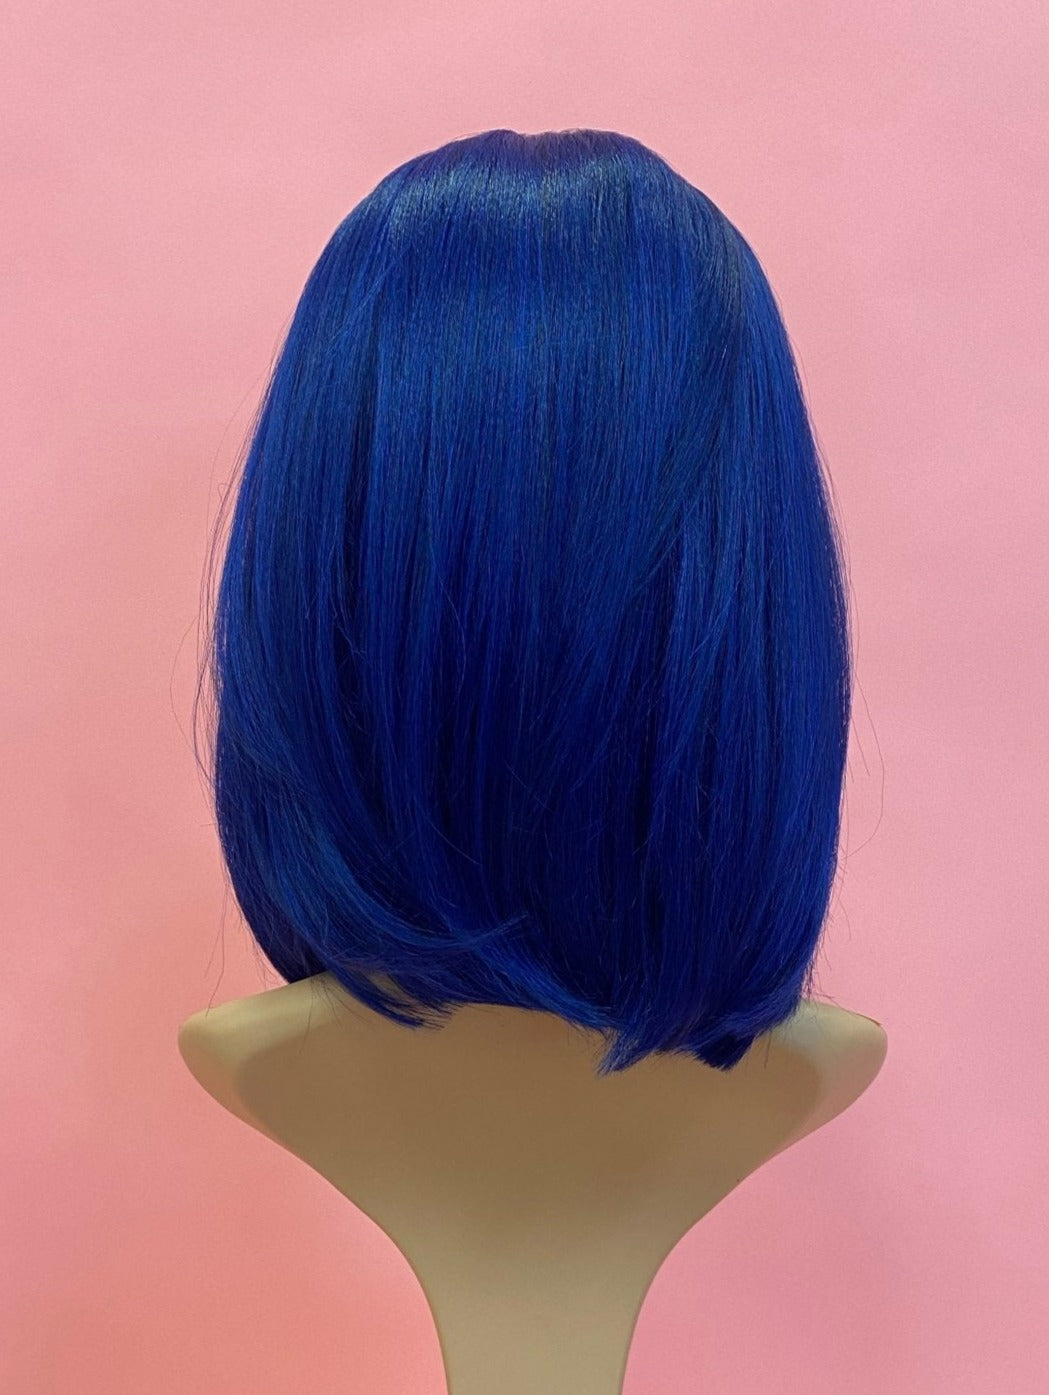 127 Sam - Middle Part Wig - BLUE - DaizyKat Cosmetics 127 Sam - Middle Part Wig - BLUE DaizyKat Cosmetics Wigs